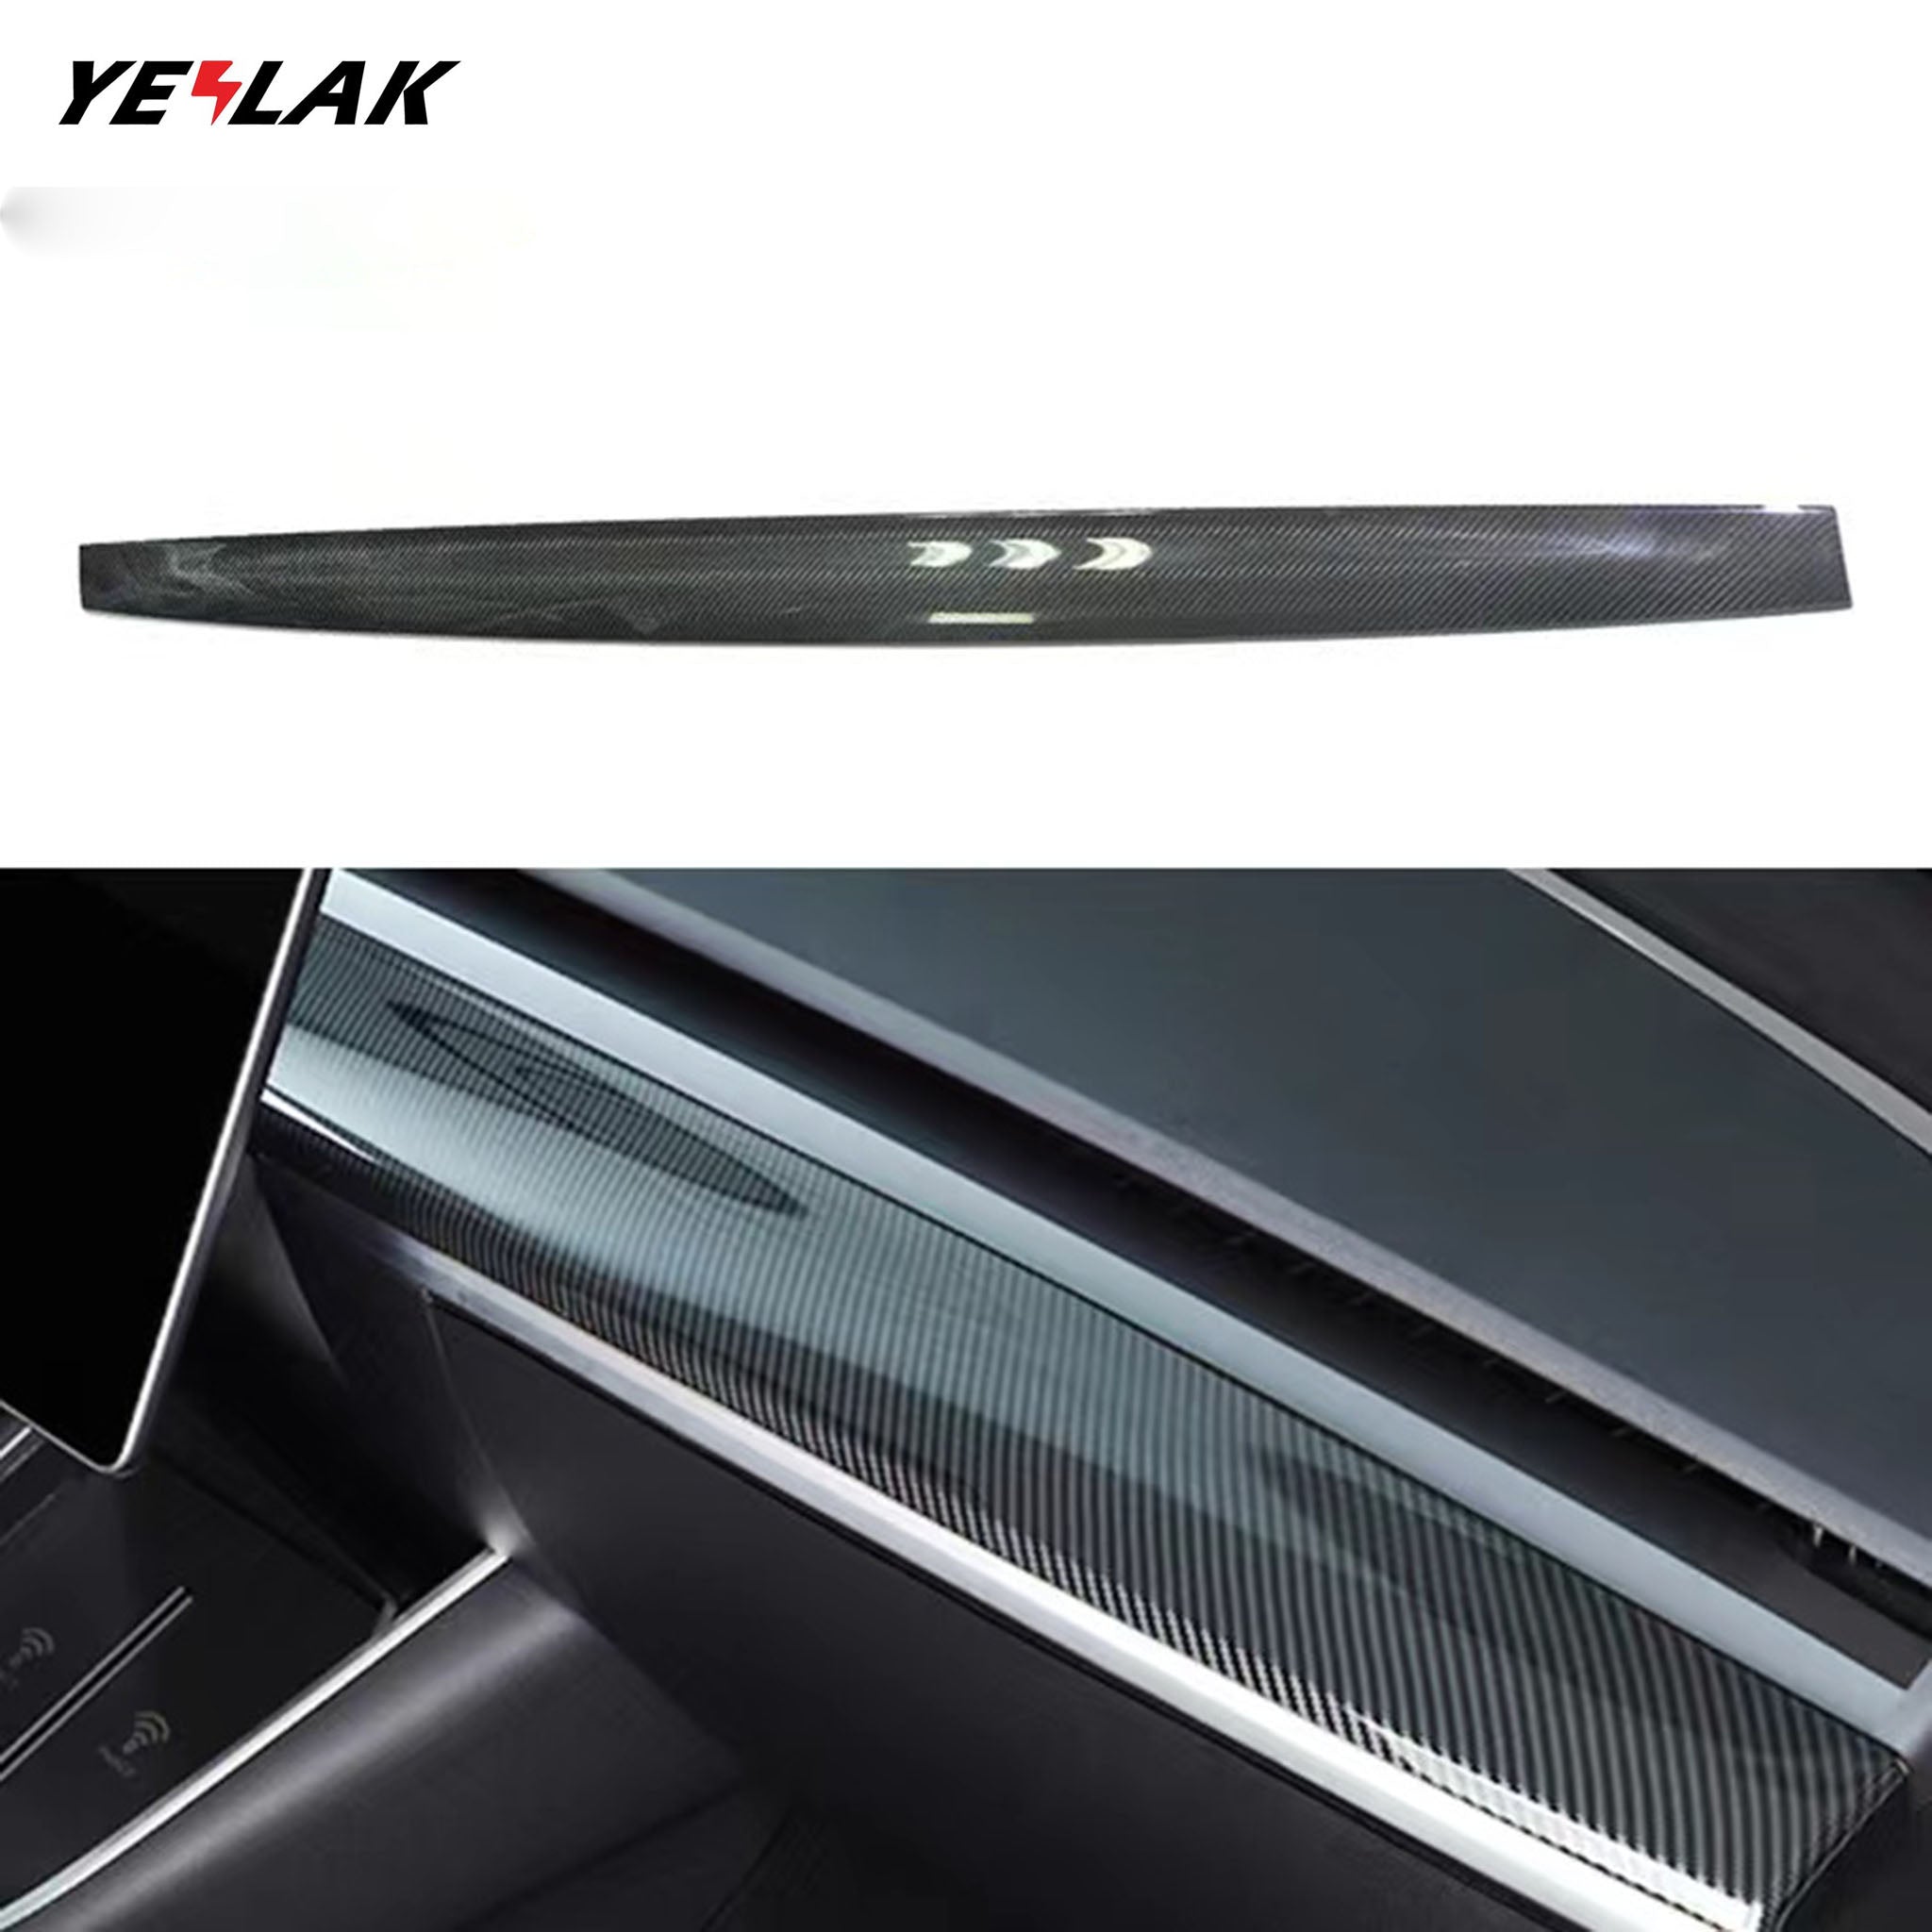 Real Carbon Fiber Dashboard Cover for Tesla Model 3 / Y-Vehicle Parts & Accessories-Yeslak